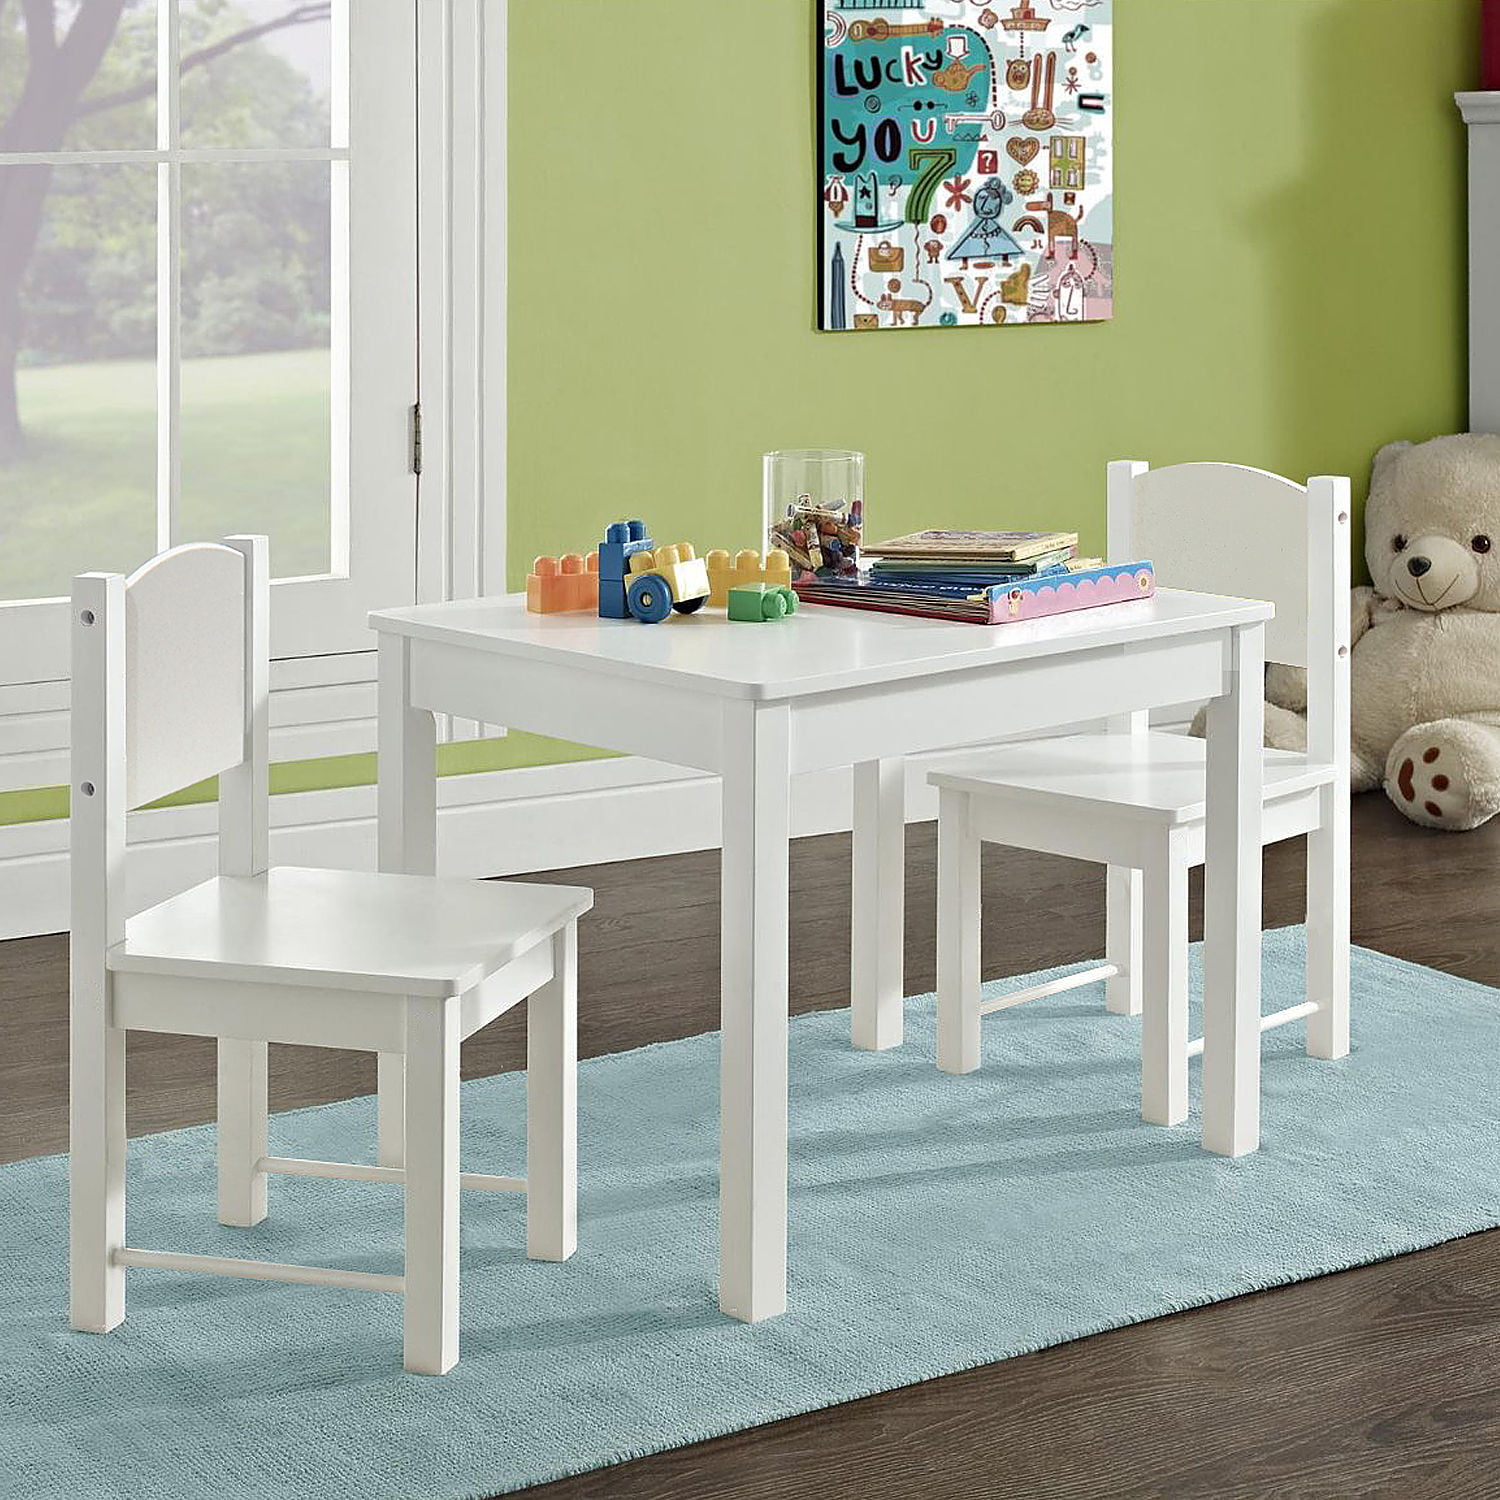 Toddler wooden table and chairs